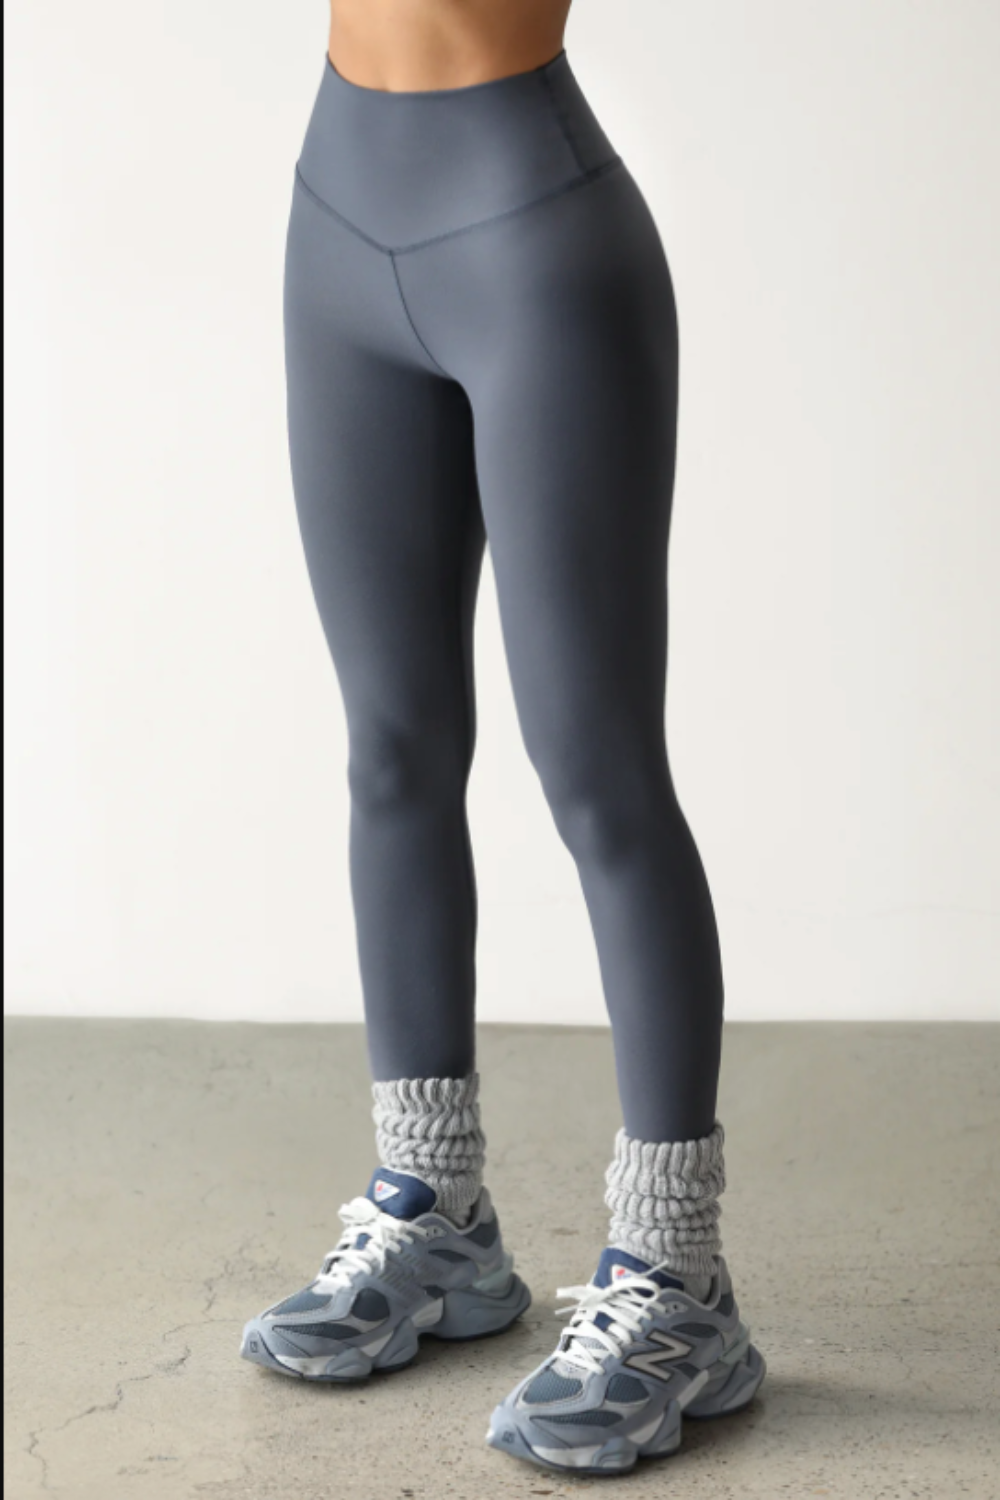 Sueded Gilla Leggings  Anthropologie Singapore Official Site